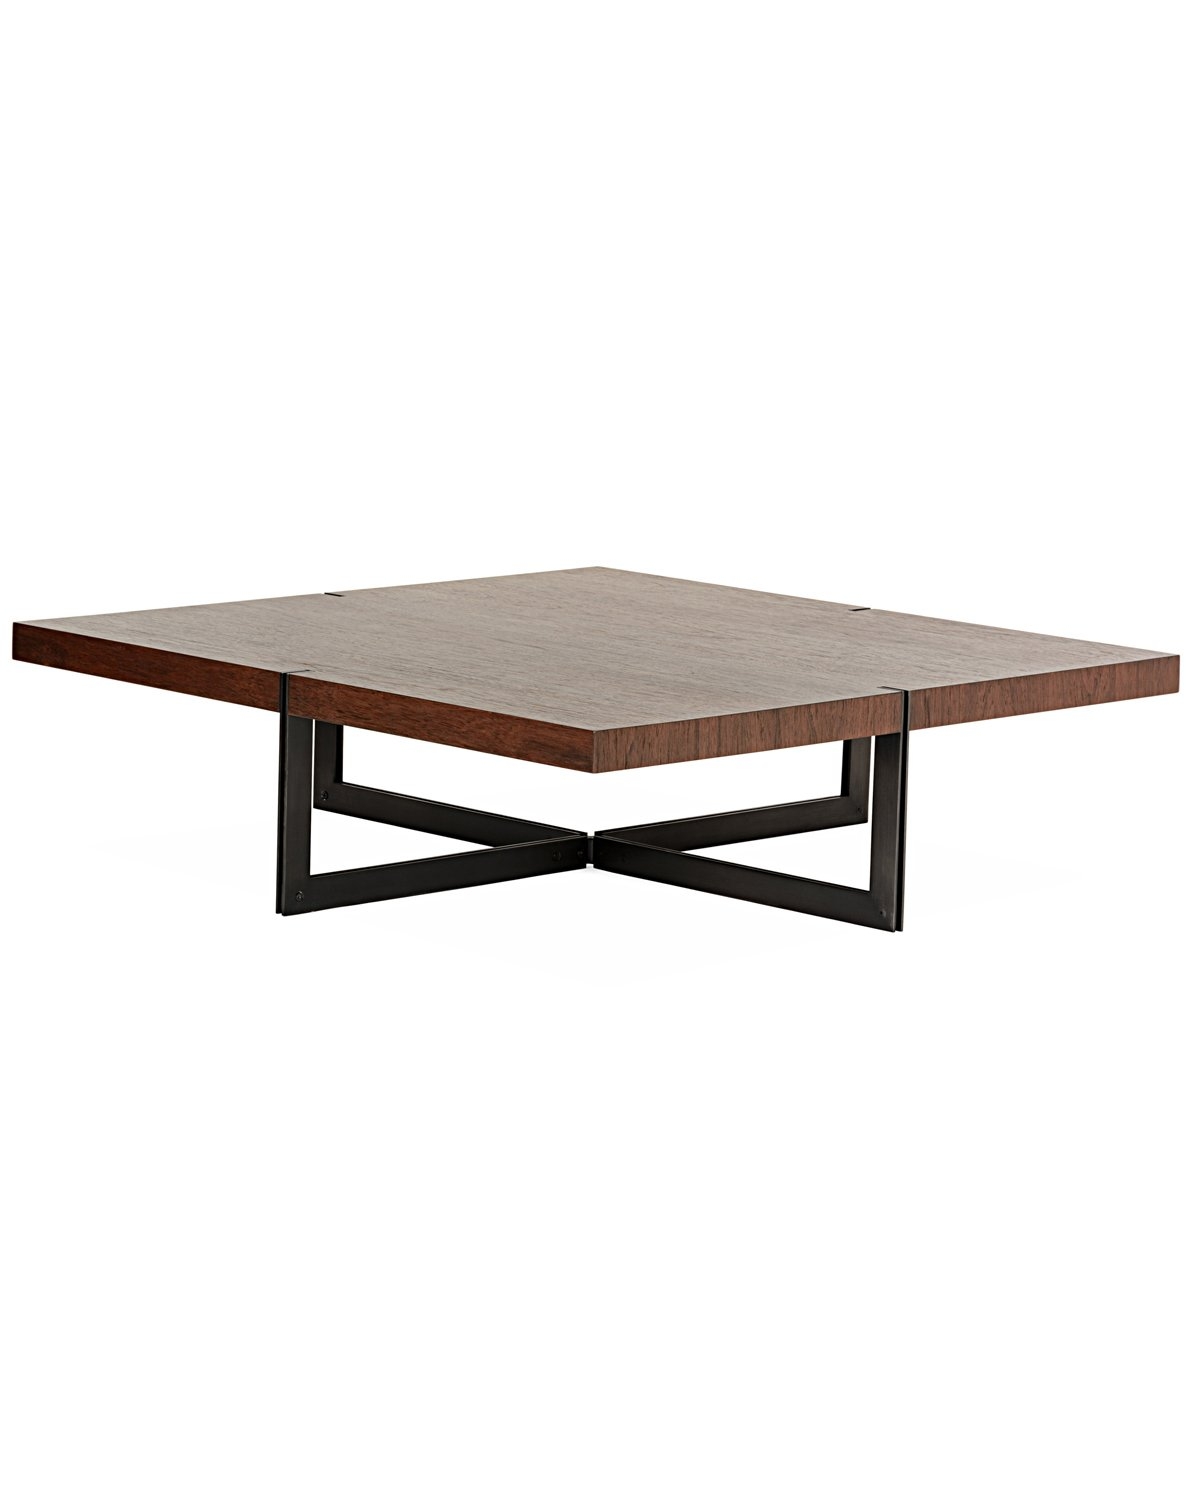 PIERS COFFEE TABLE - Image 1